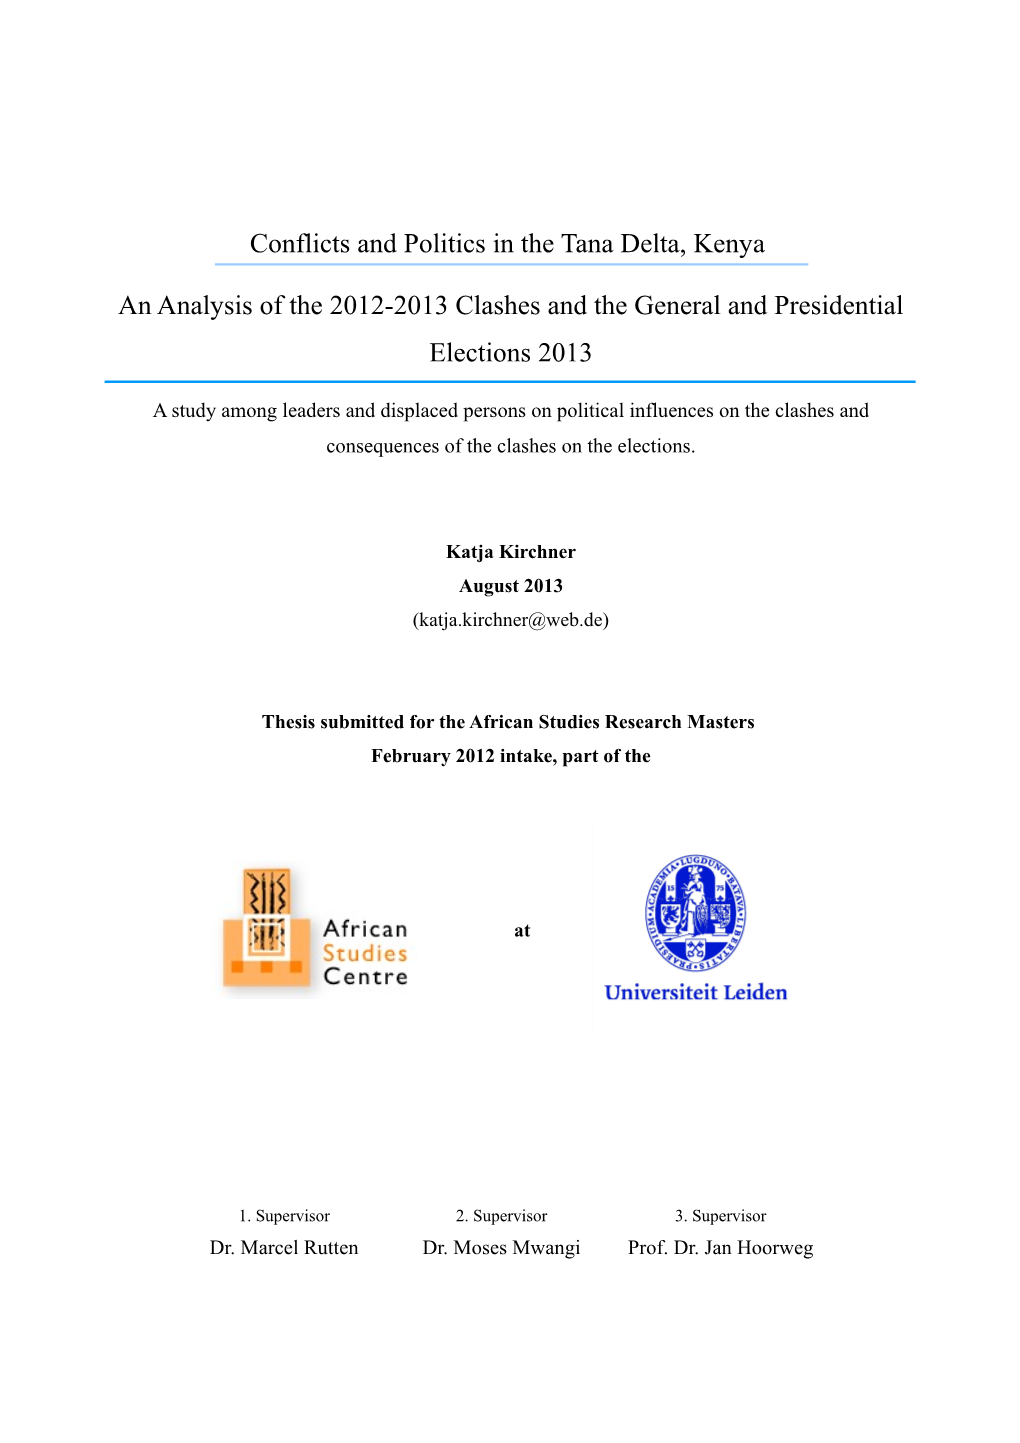 Conflicts and Politics in the Tana Delta, Kenya an Analysis of the 2012